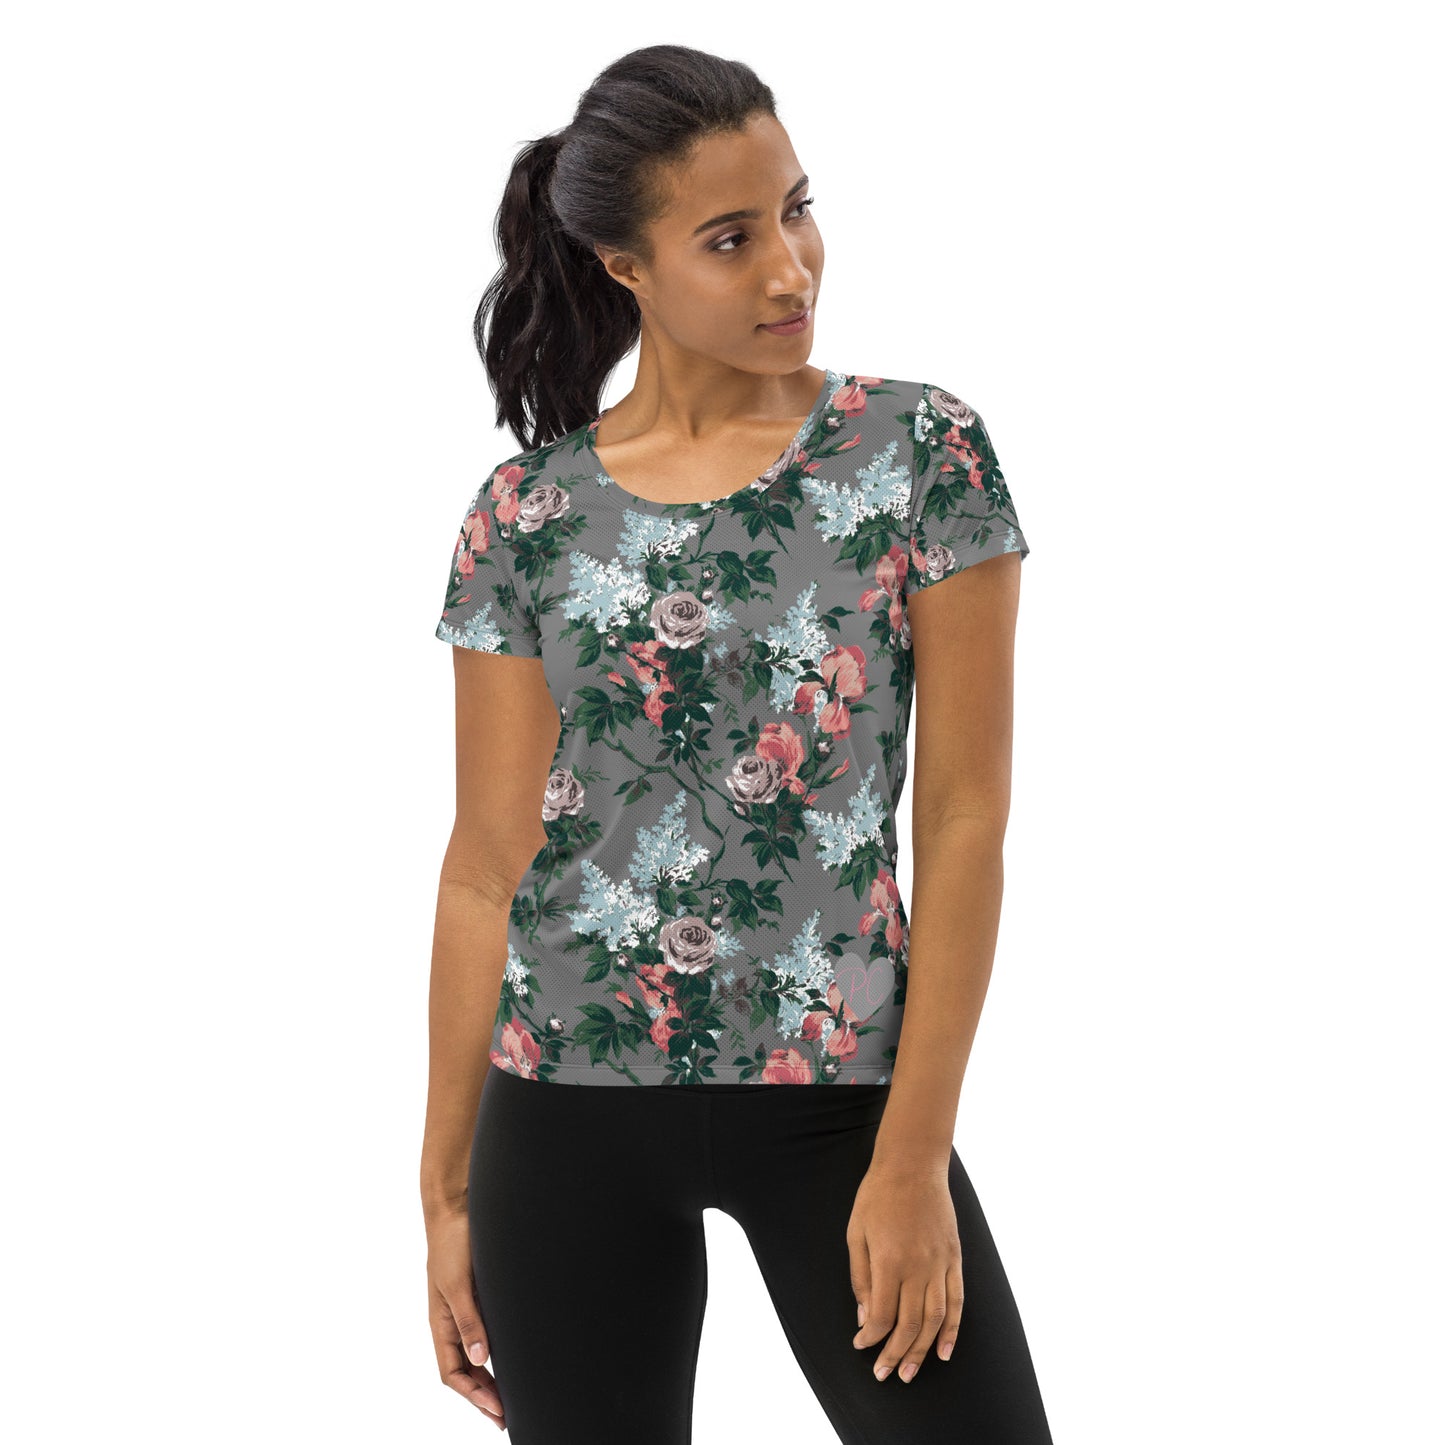 J'Adore Grey Bella Roses Print Women's Athletic T-shirt | Pinup Couture Relaxed